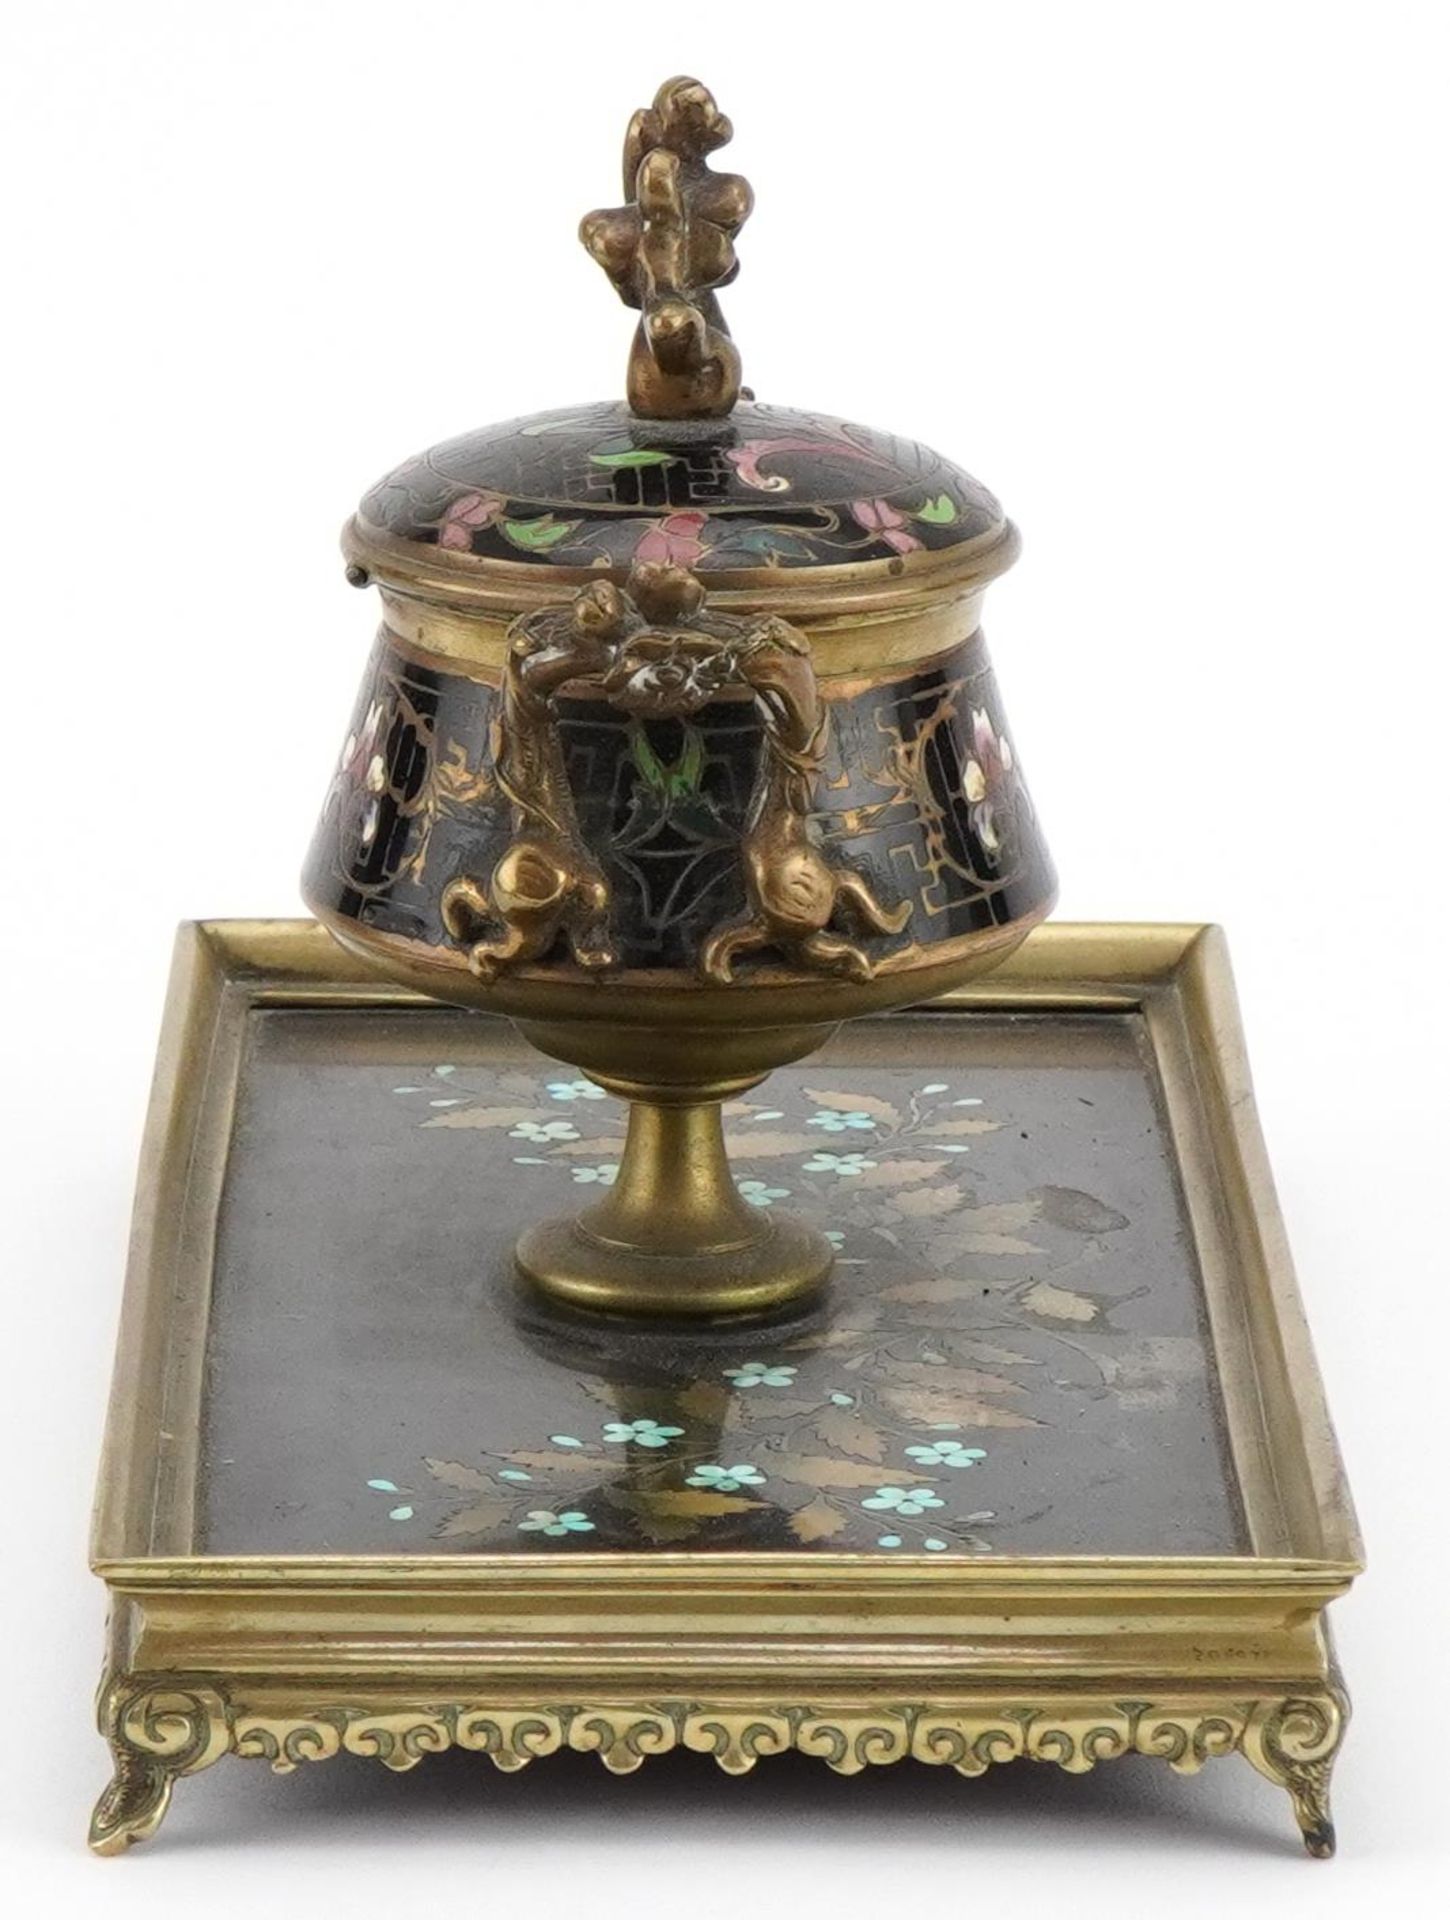 19th century ornate brass pietra dura and cloisonne desk inkwell with glass liner finely inlaid - Image 6 of 8